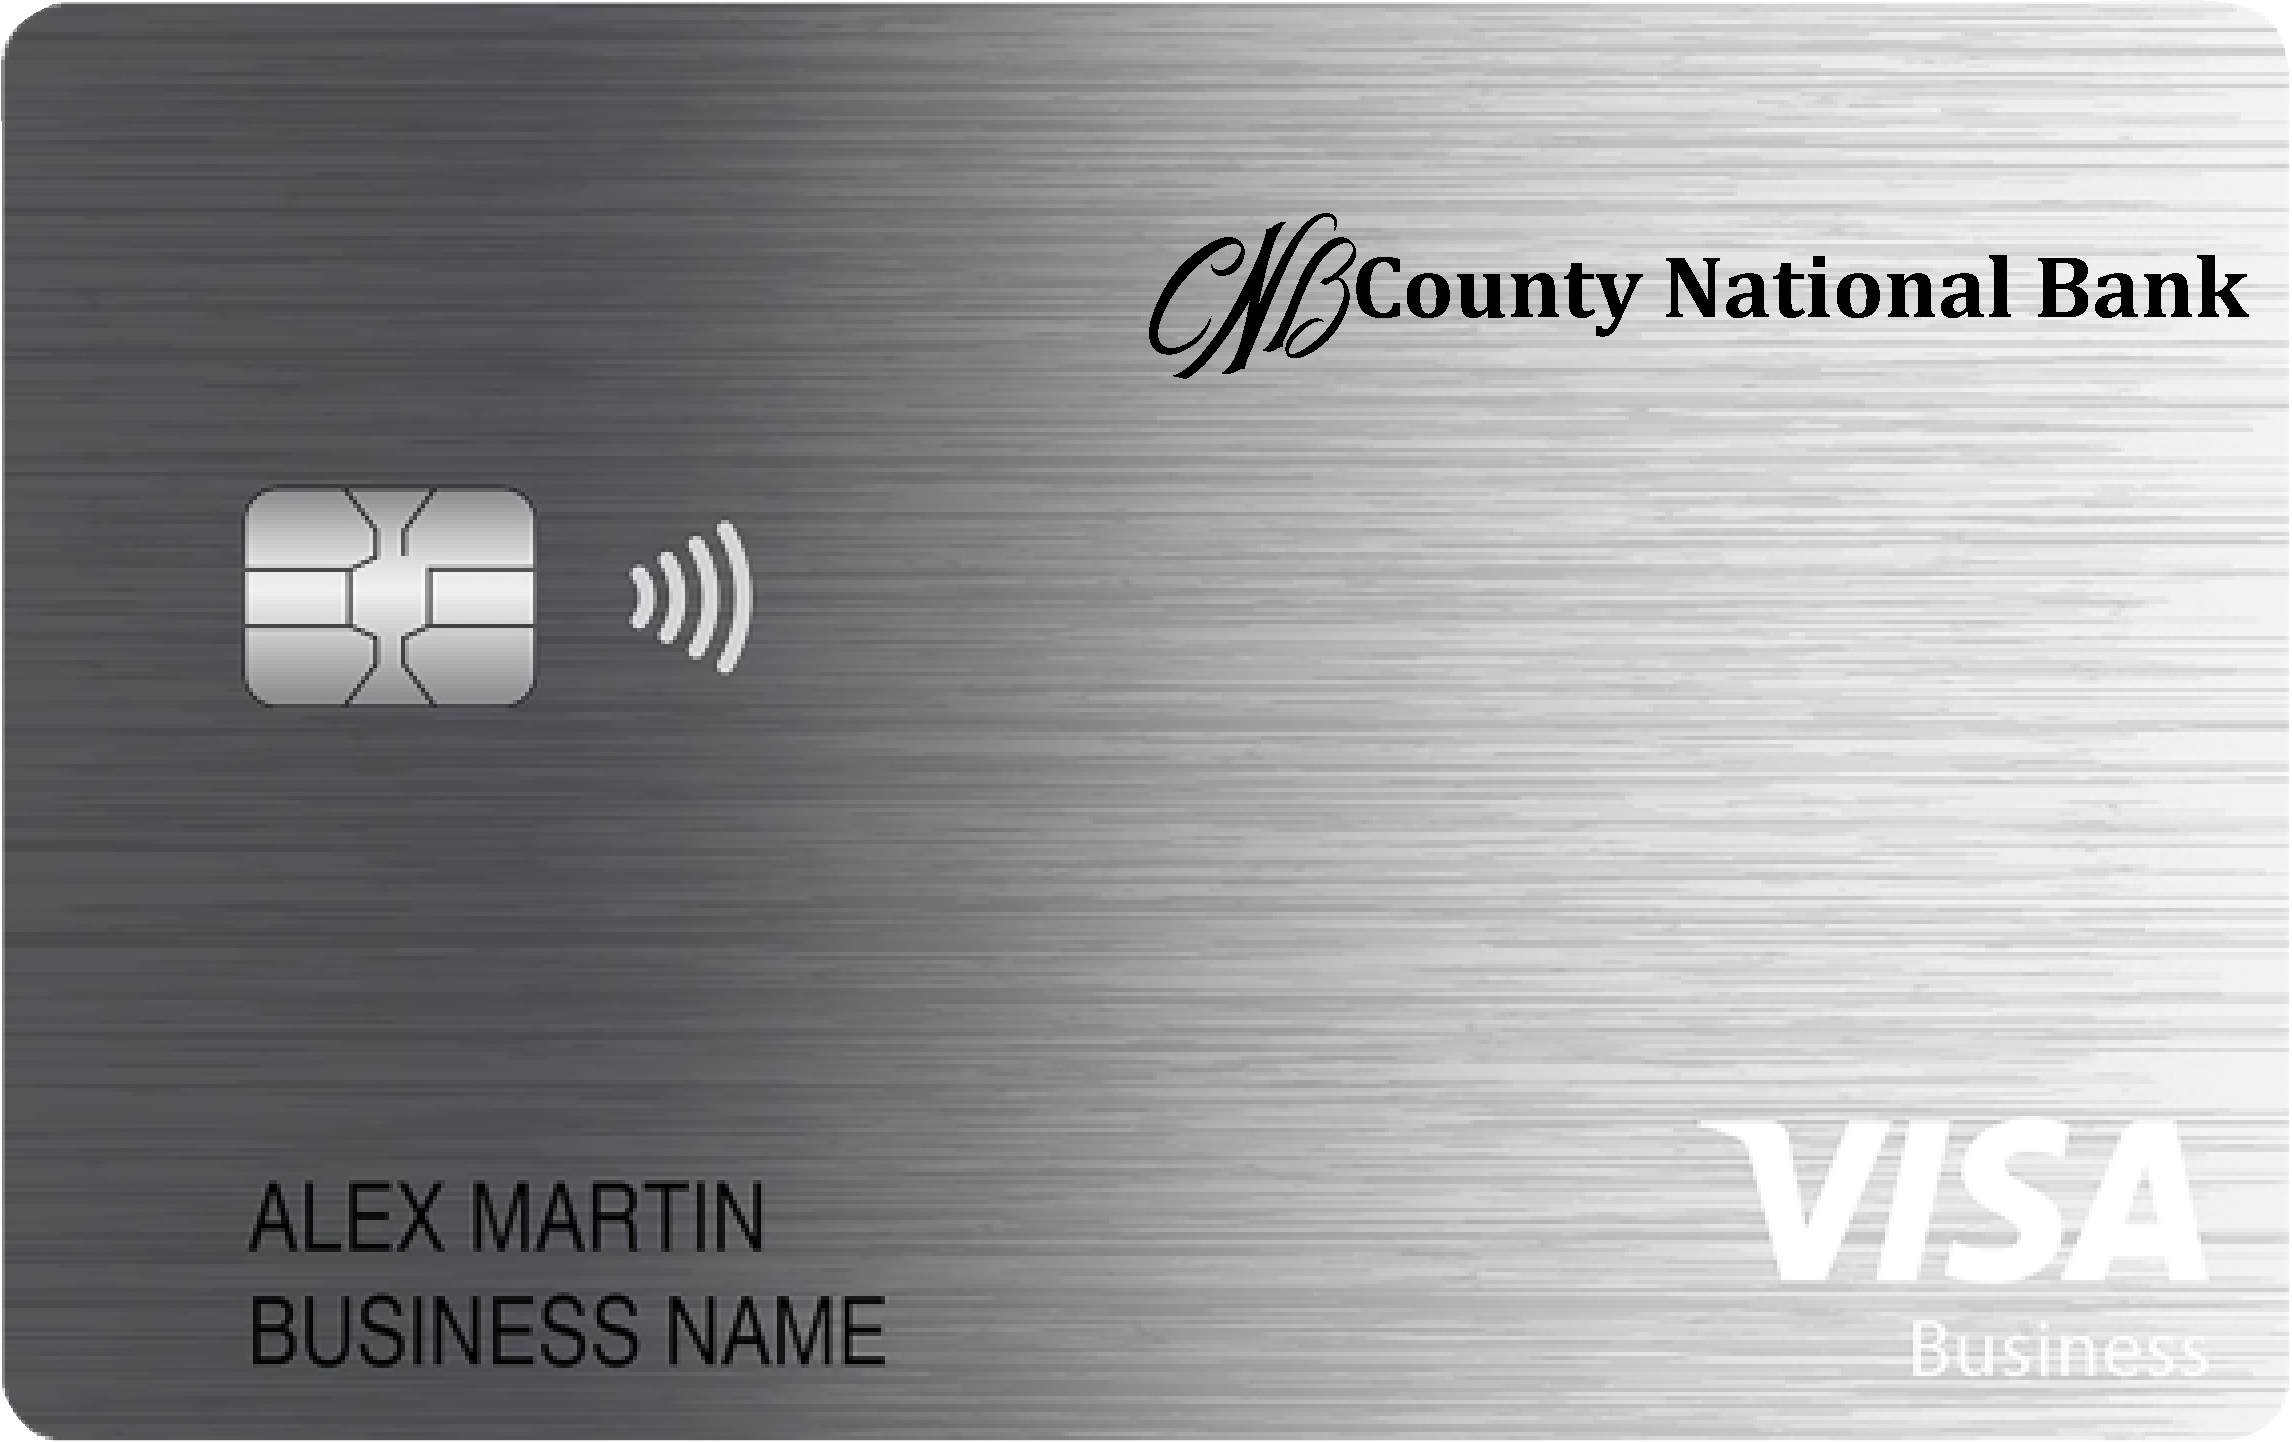 County National Bank Business Cash Preferred Card